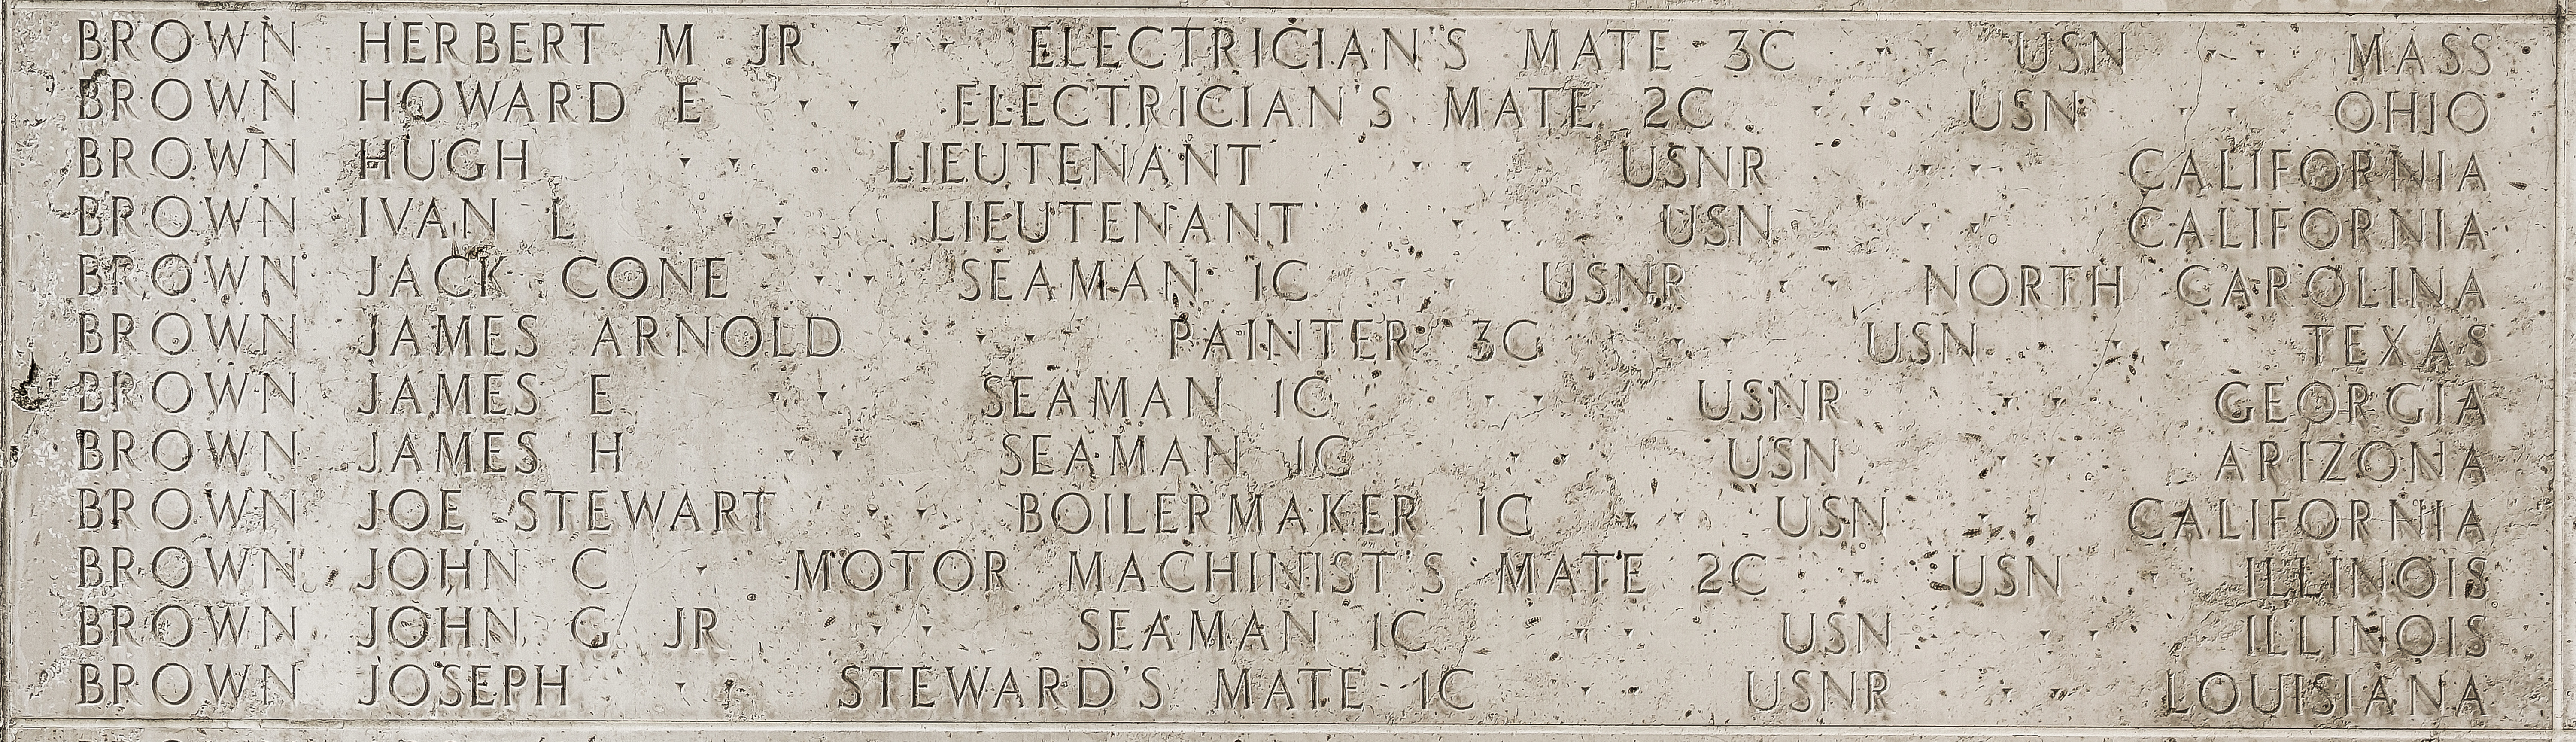 Howard E. Brown, Electrician's Mate Second Class